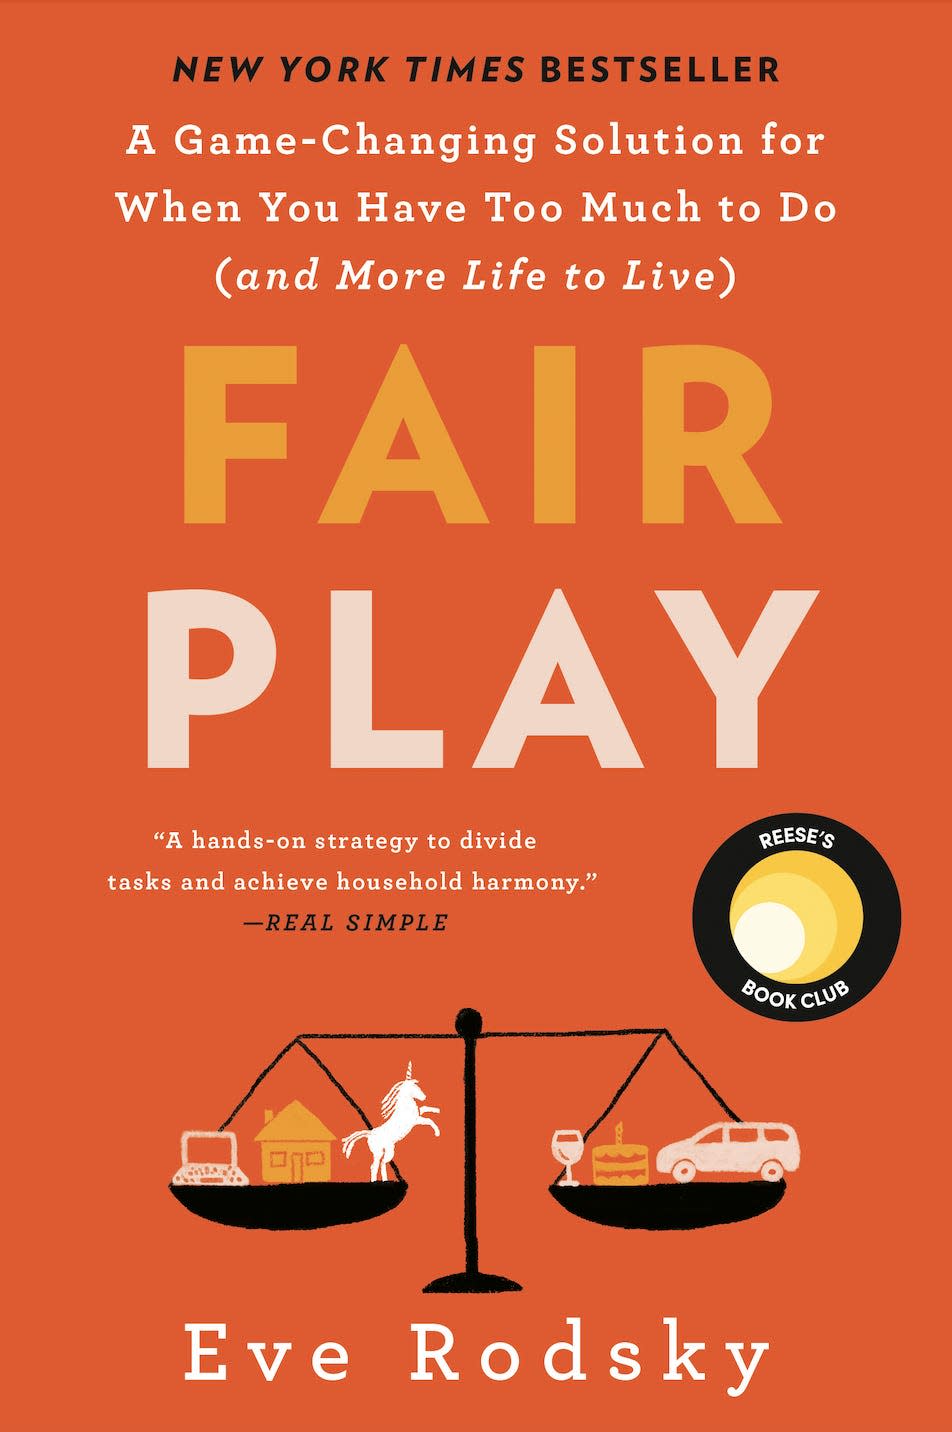 "Fair Play: A Game-Changing Solution for When You Have Too Much to Do (and More Life to Live)